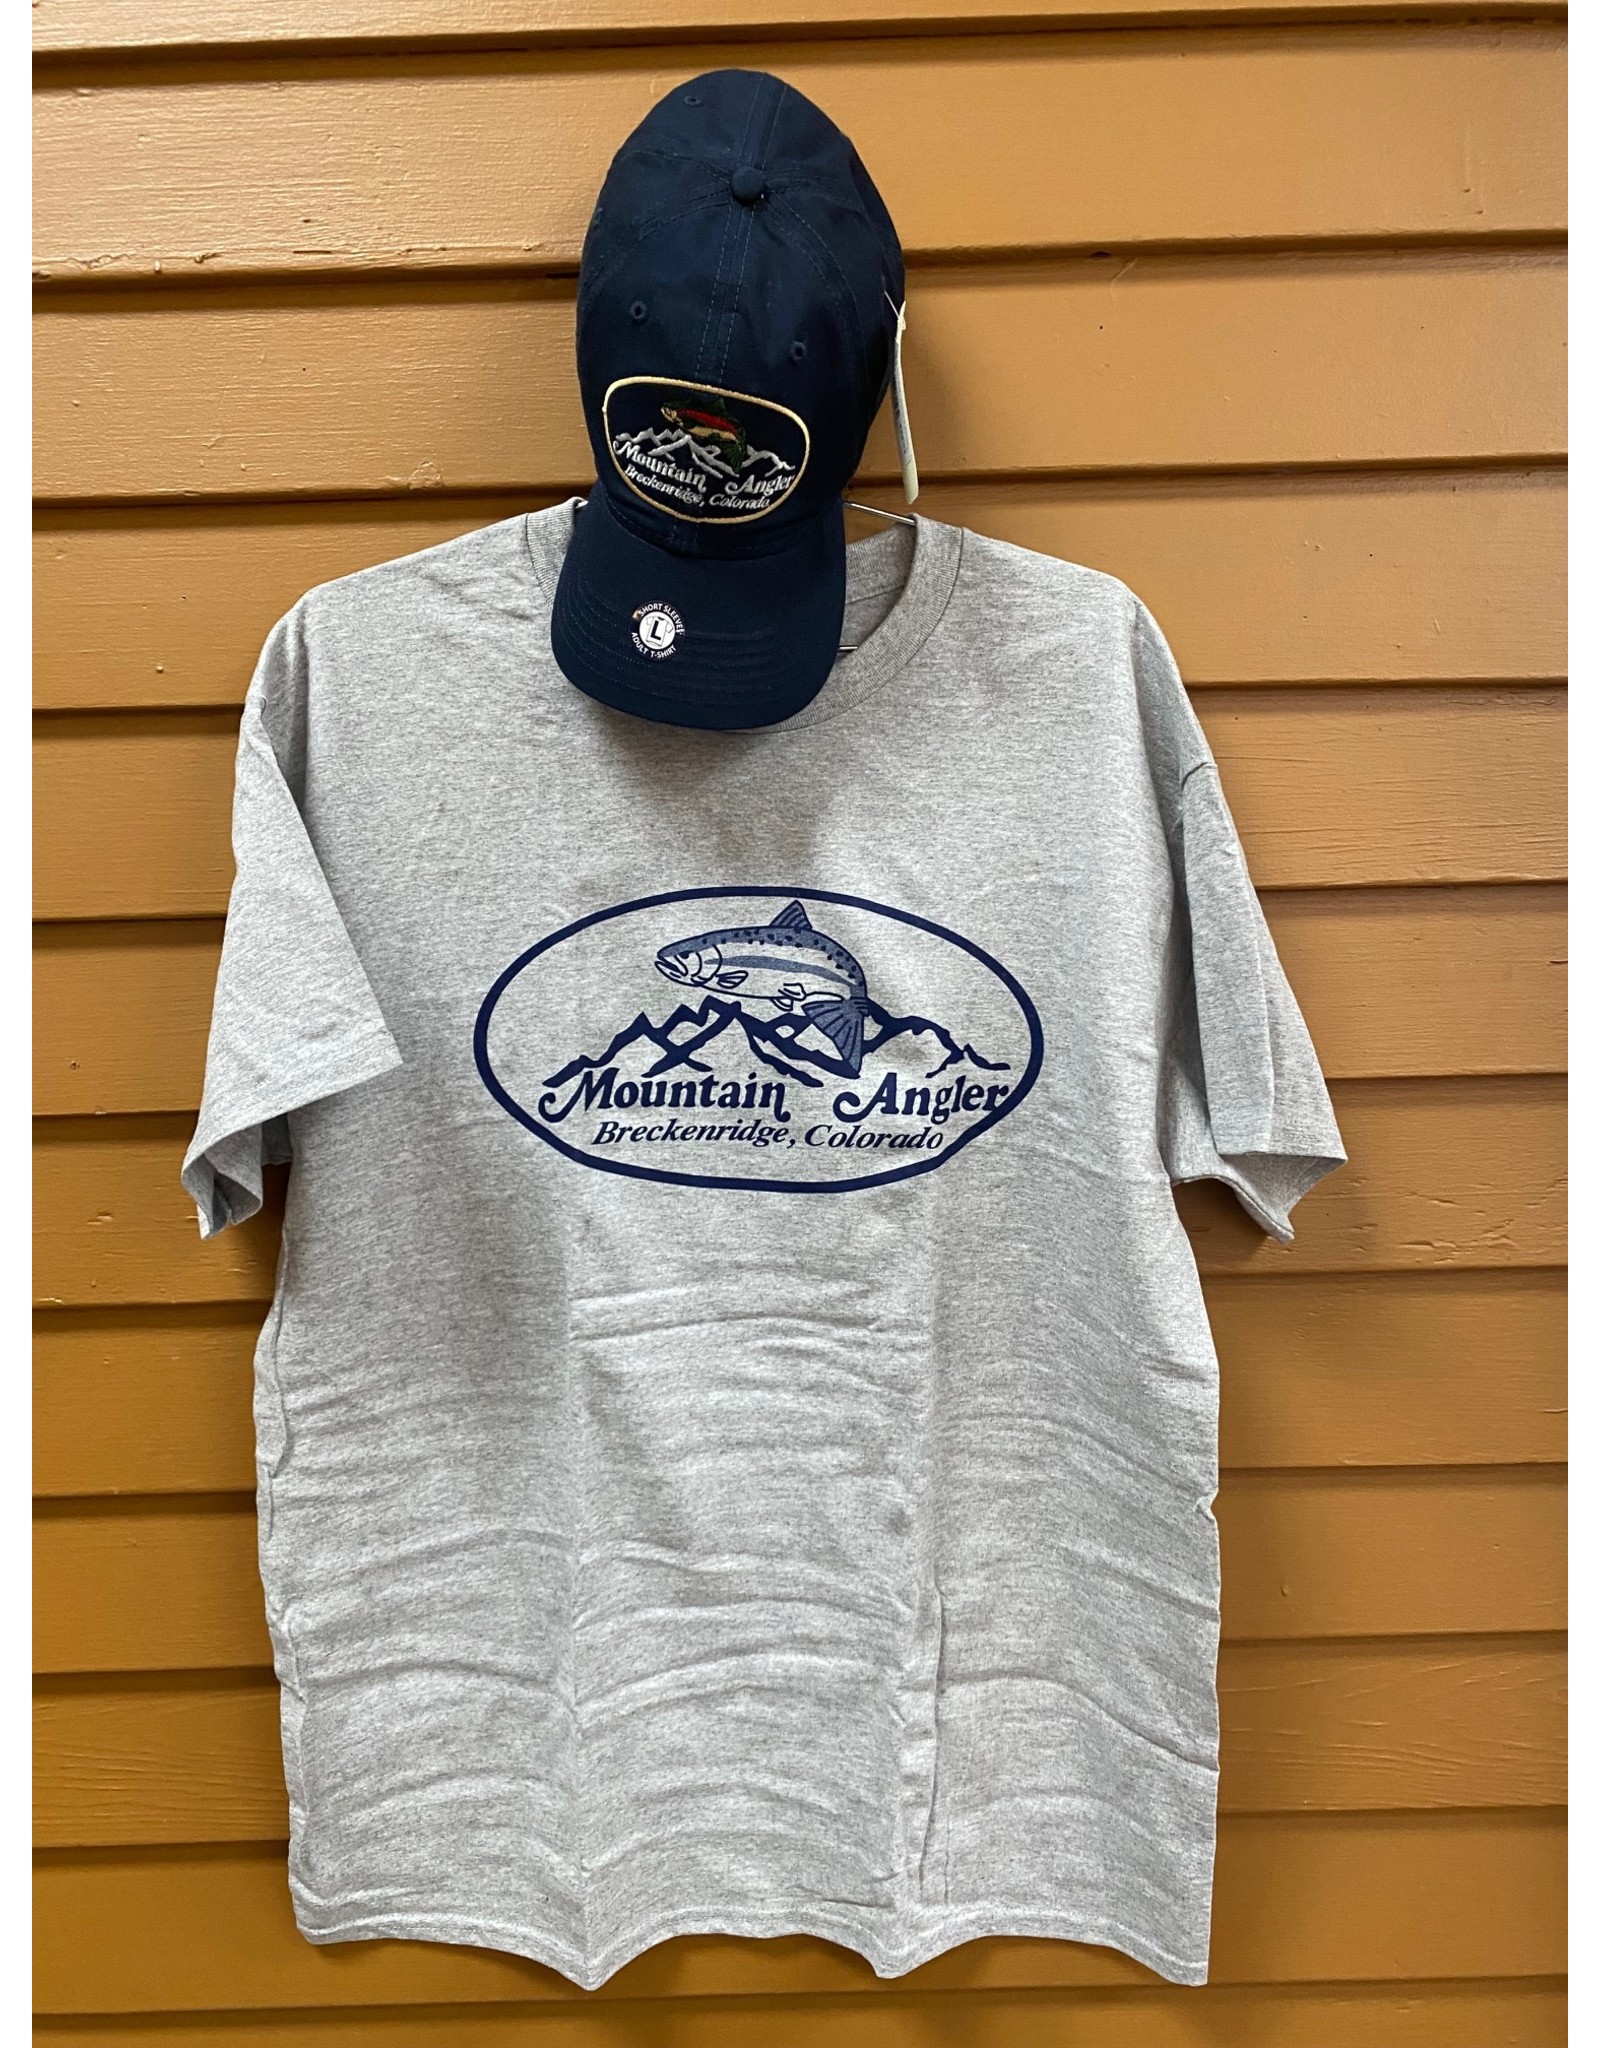 Ouray Mountain Angler - Hat / T-Shirt Combo